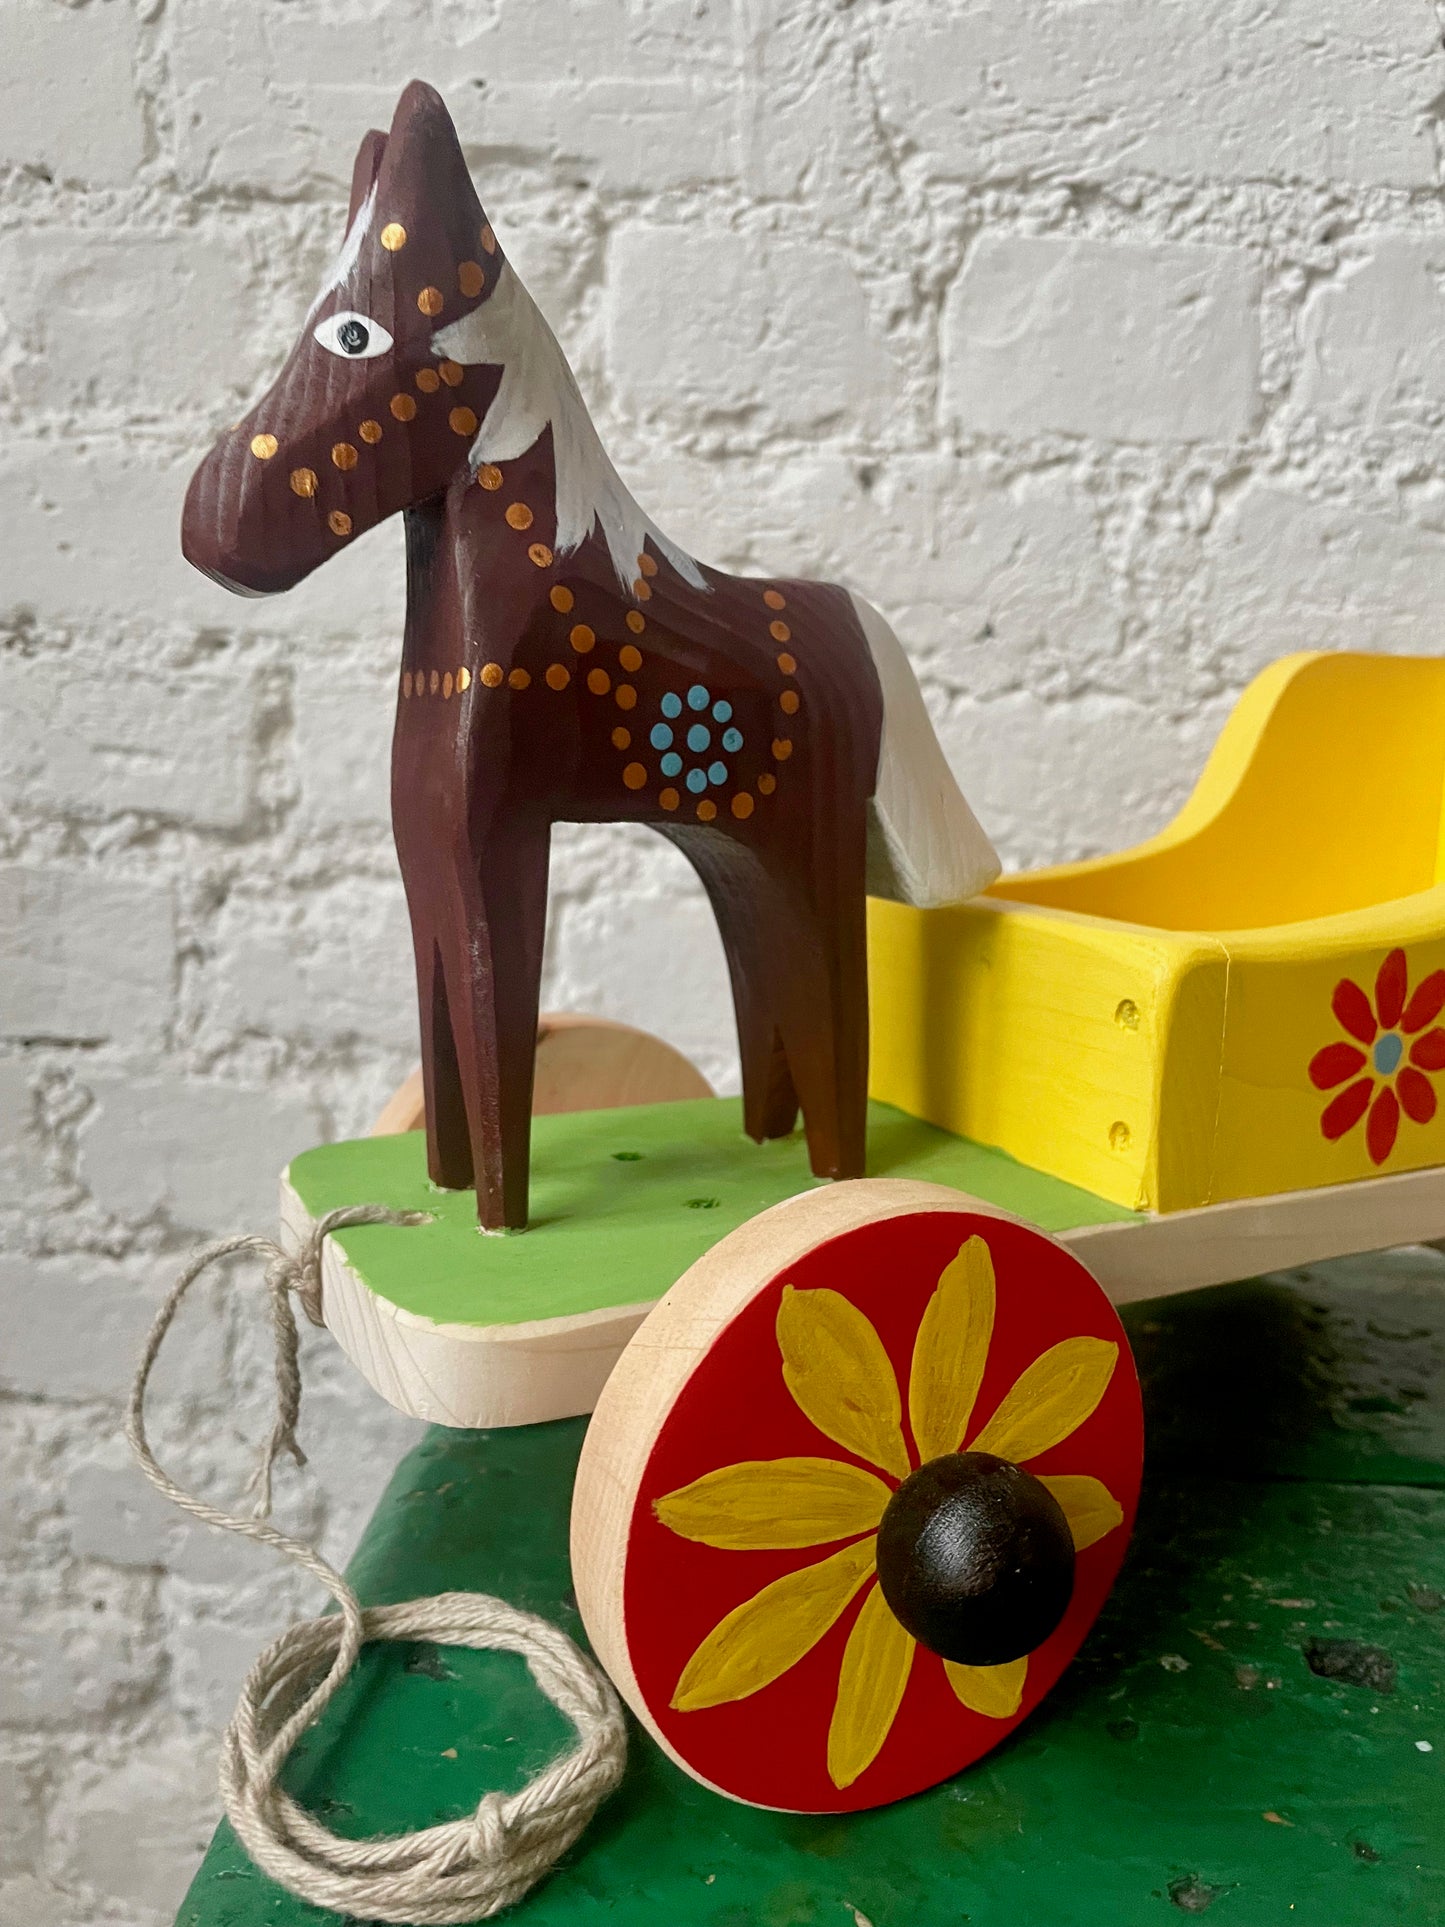 Brown Wooden Horse with Yellow Cart Toy by Krzysztof